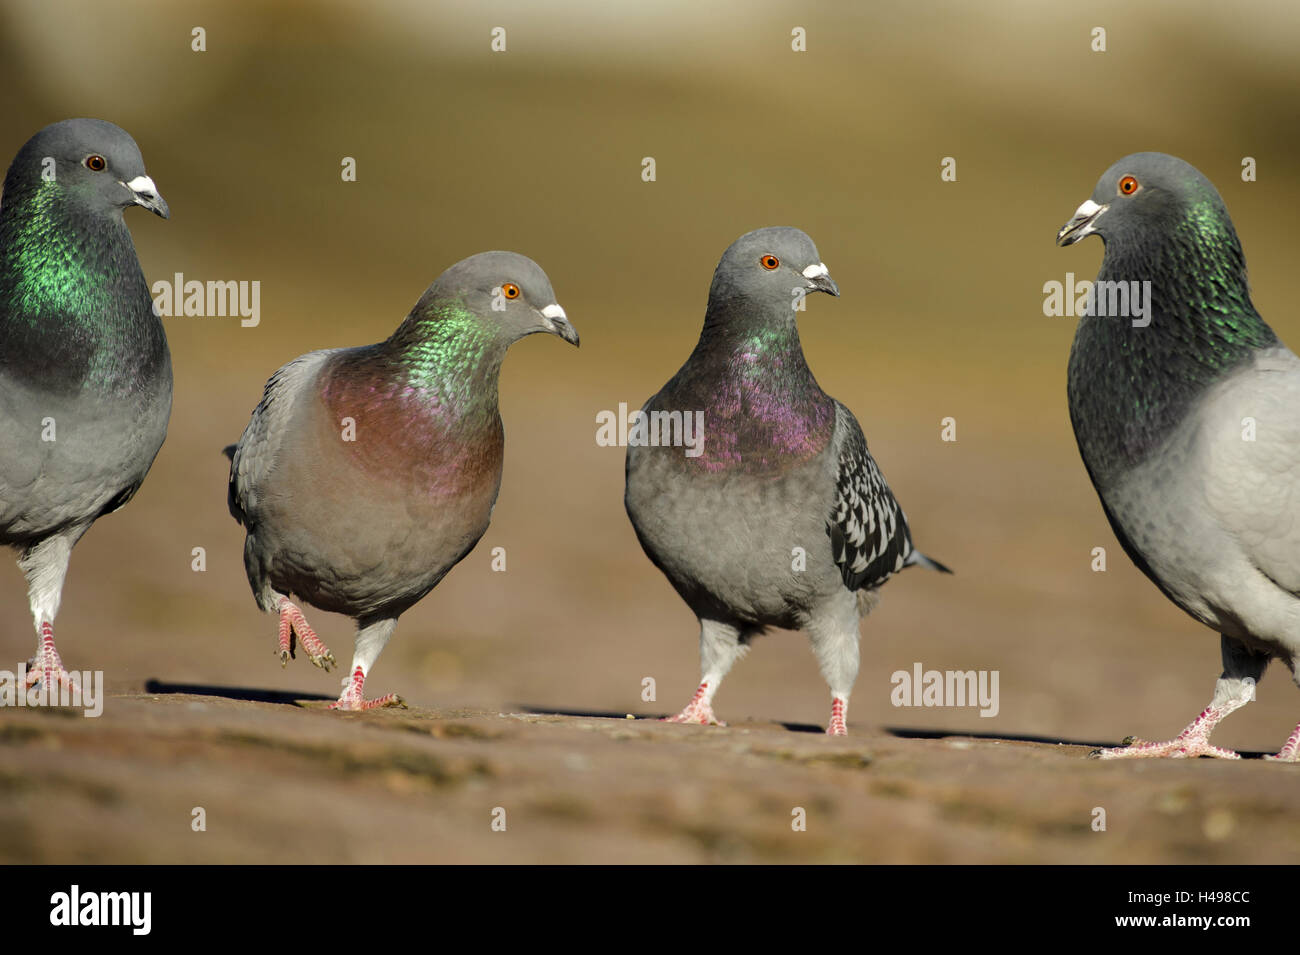 Town pigeons, courtship display, Stock Photo